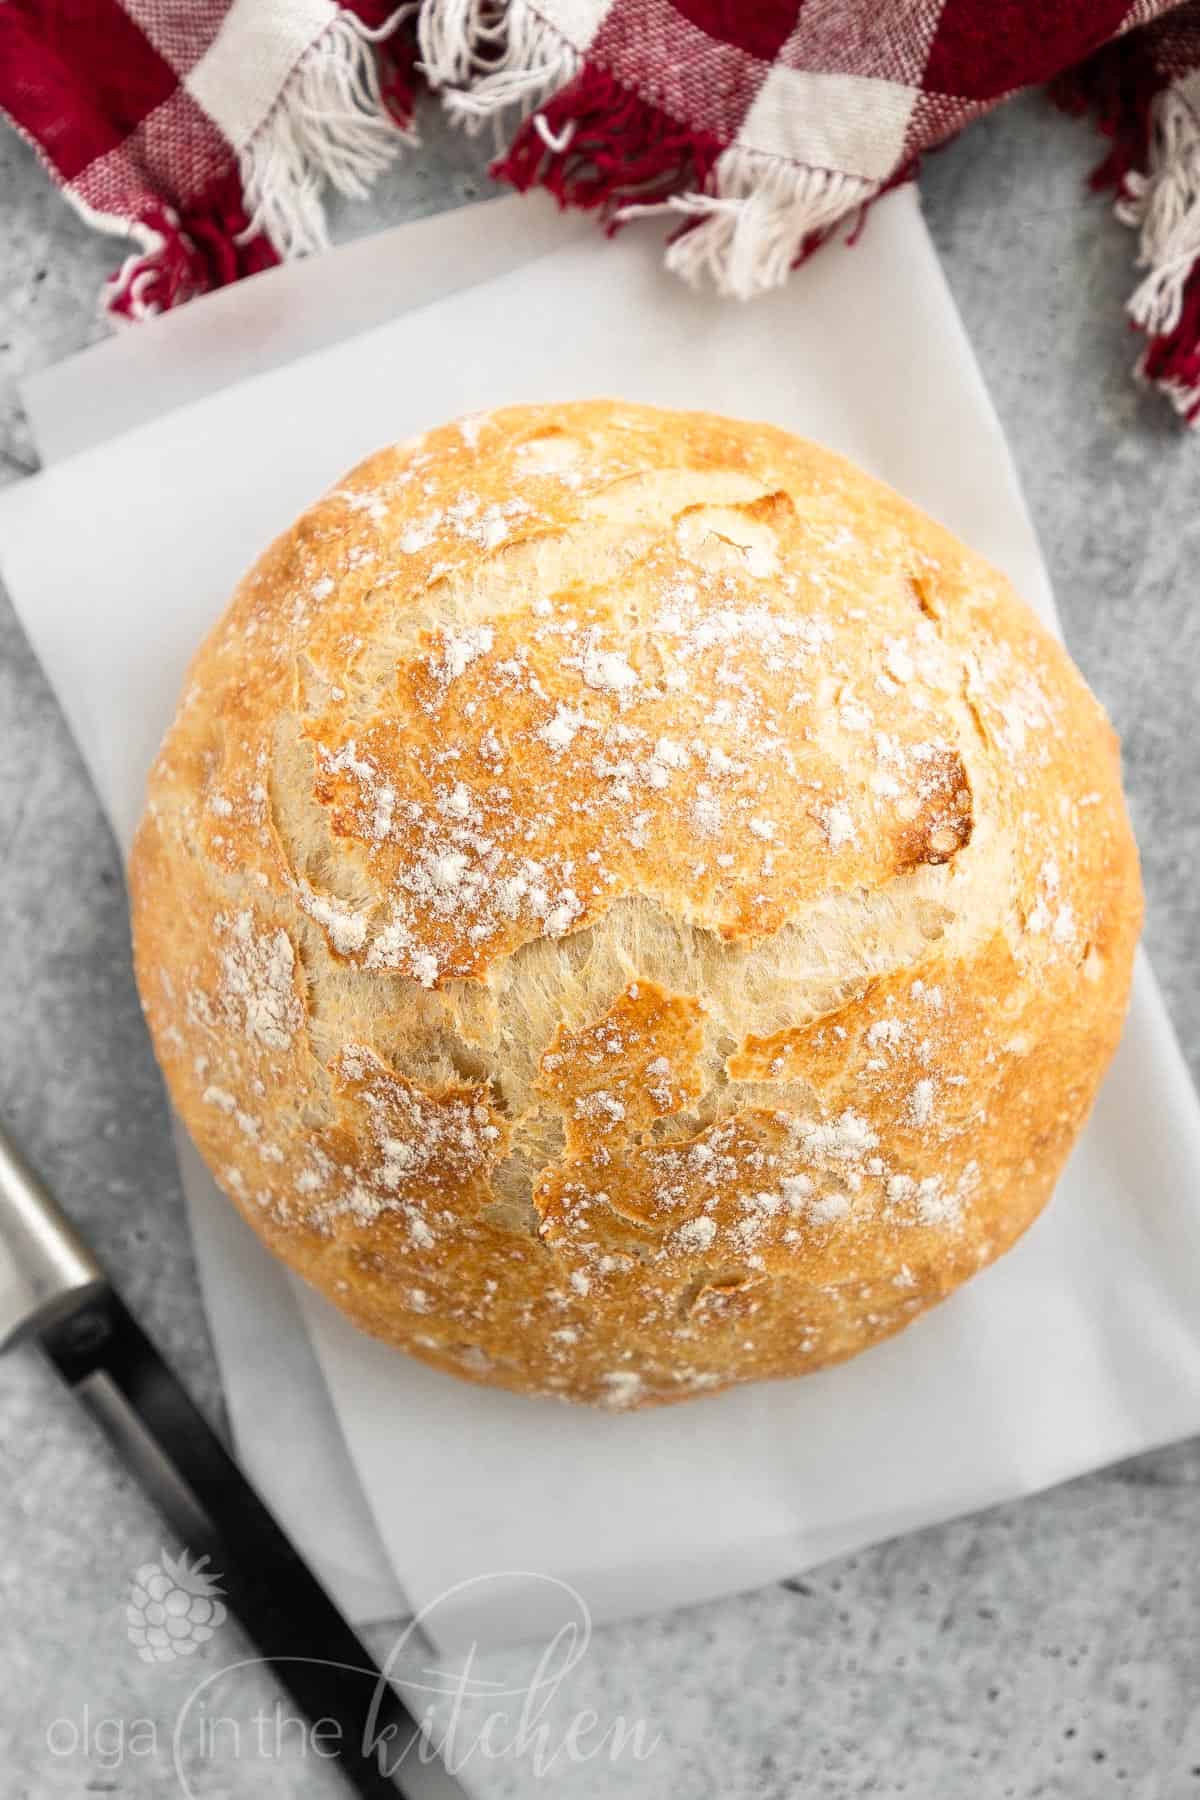 This easy No-Knead Bread loaf has a deliciously crisp crust and a soft spongy center. It’s the perfect blend of soft and chewy. With only 4 ingredients (flour, salt, yeast and water), you can make a bakery-quality, scrumptious loaf of homemade bread. #nokneadbread #bread #olgainthekitchen #easyrecipe #recipes #rusticbread